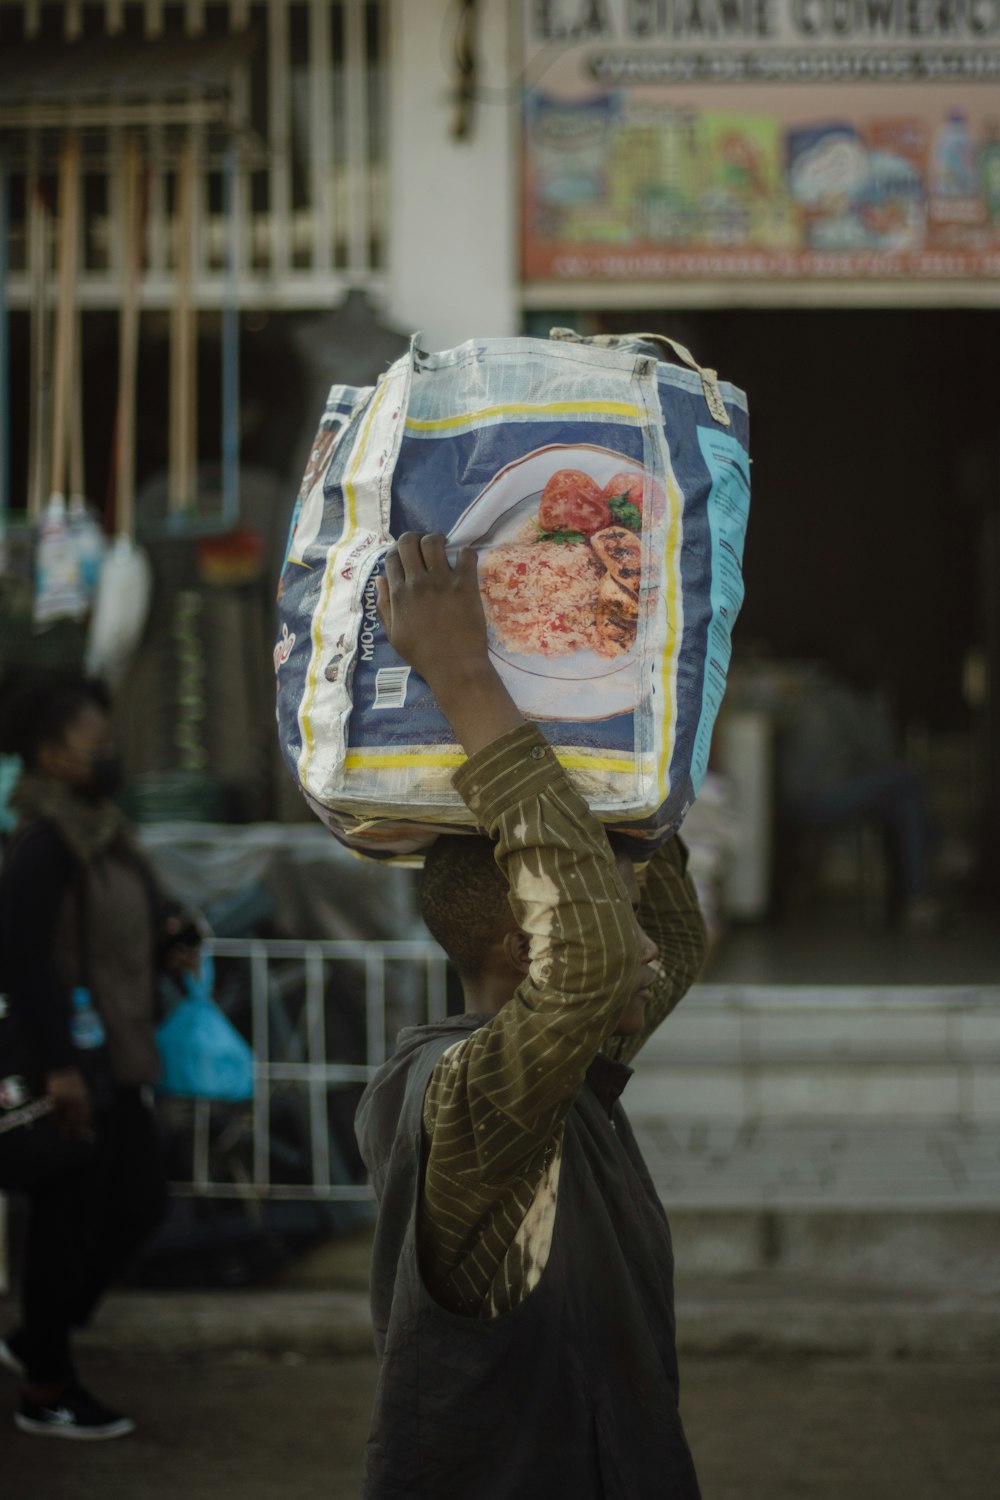 a person carrying a bag of food